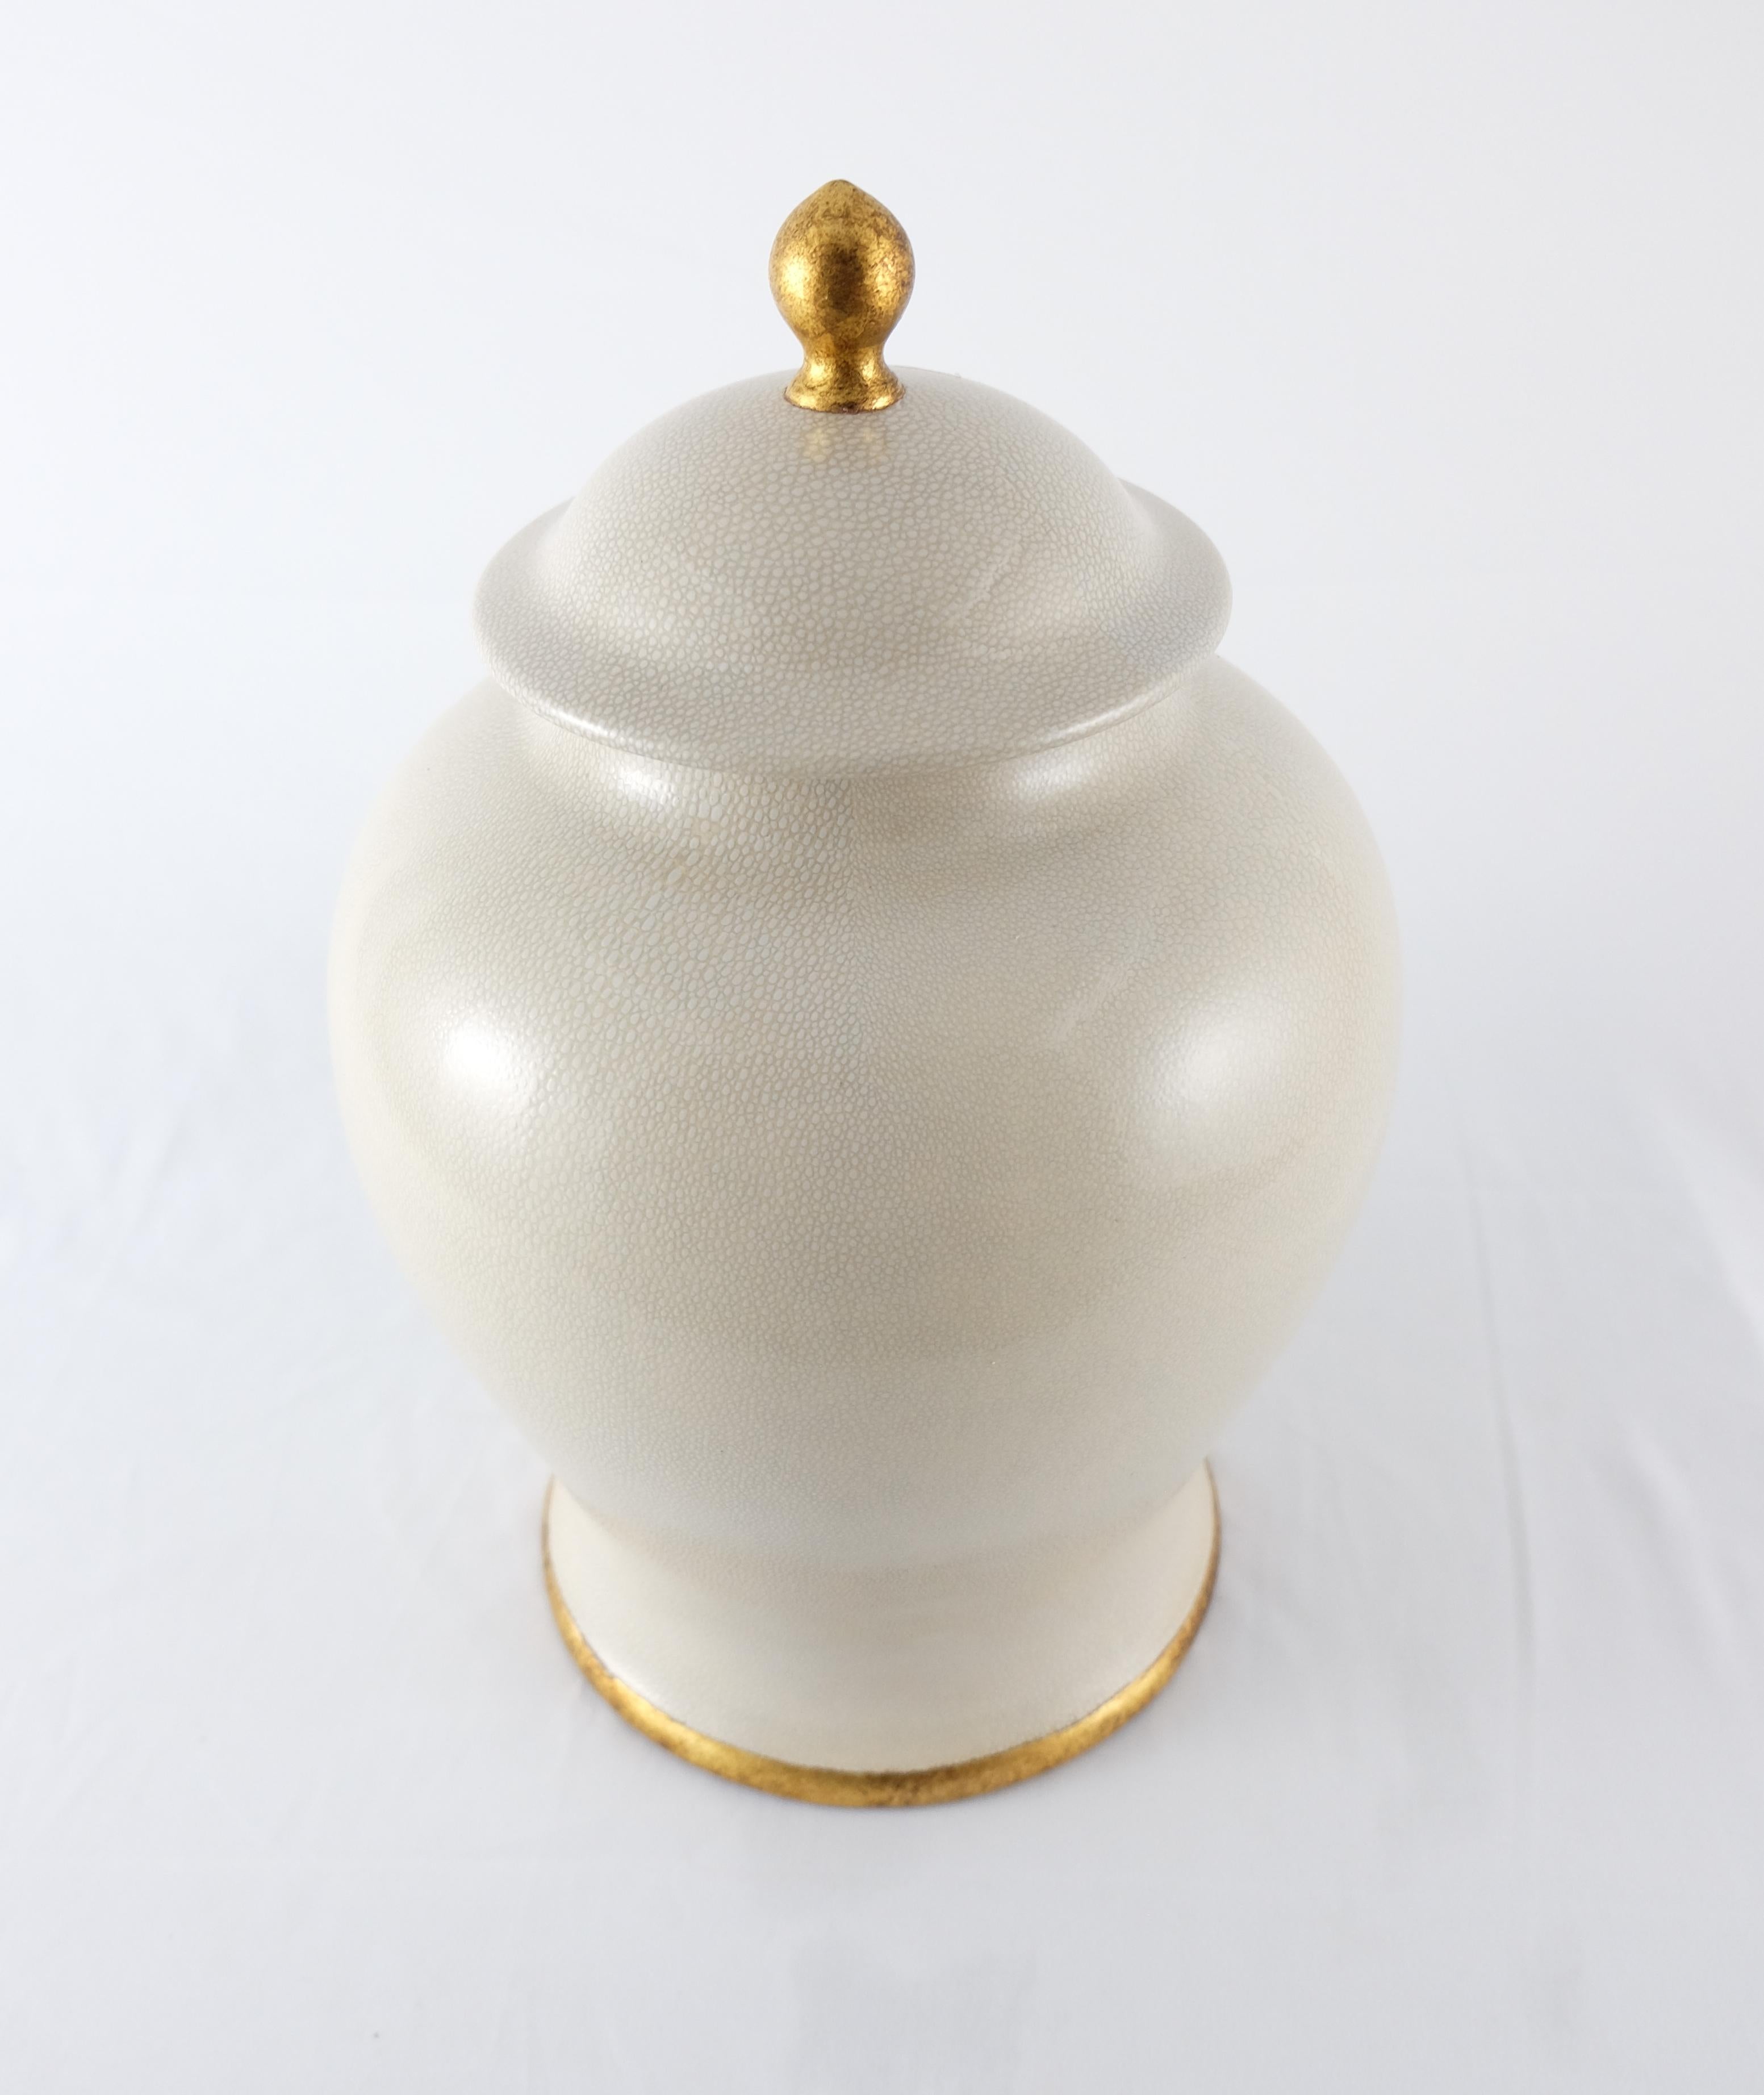 Neoclassical Paolo Marioni Large Italian Glazed Ceramic Jar with Gold-Leaf Accents For Sale